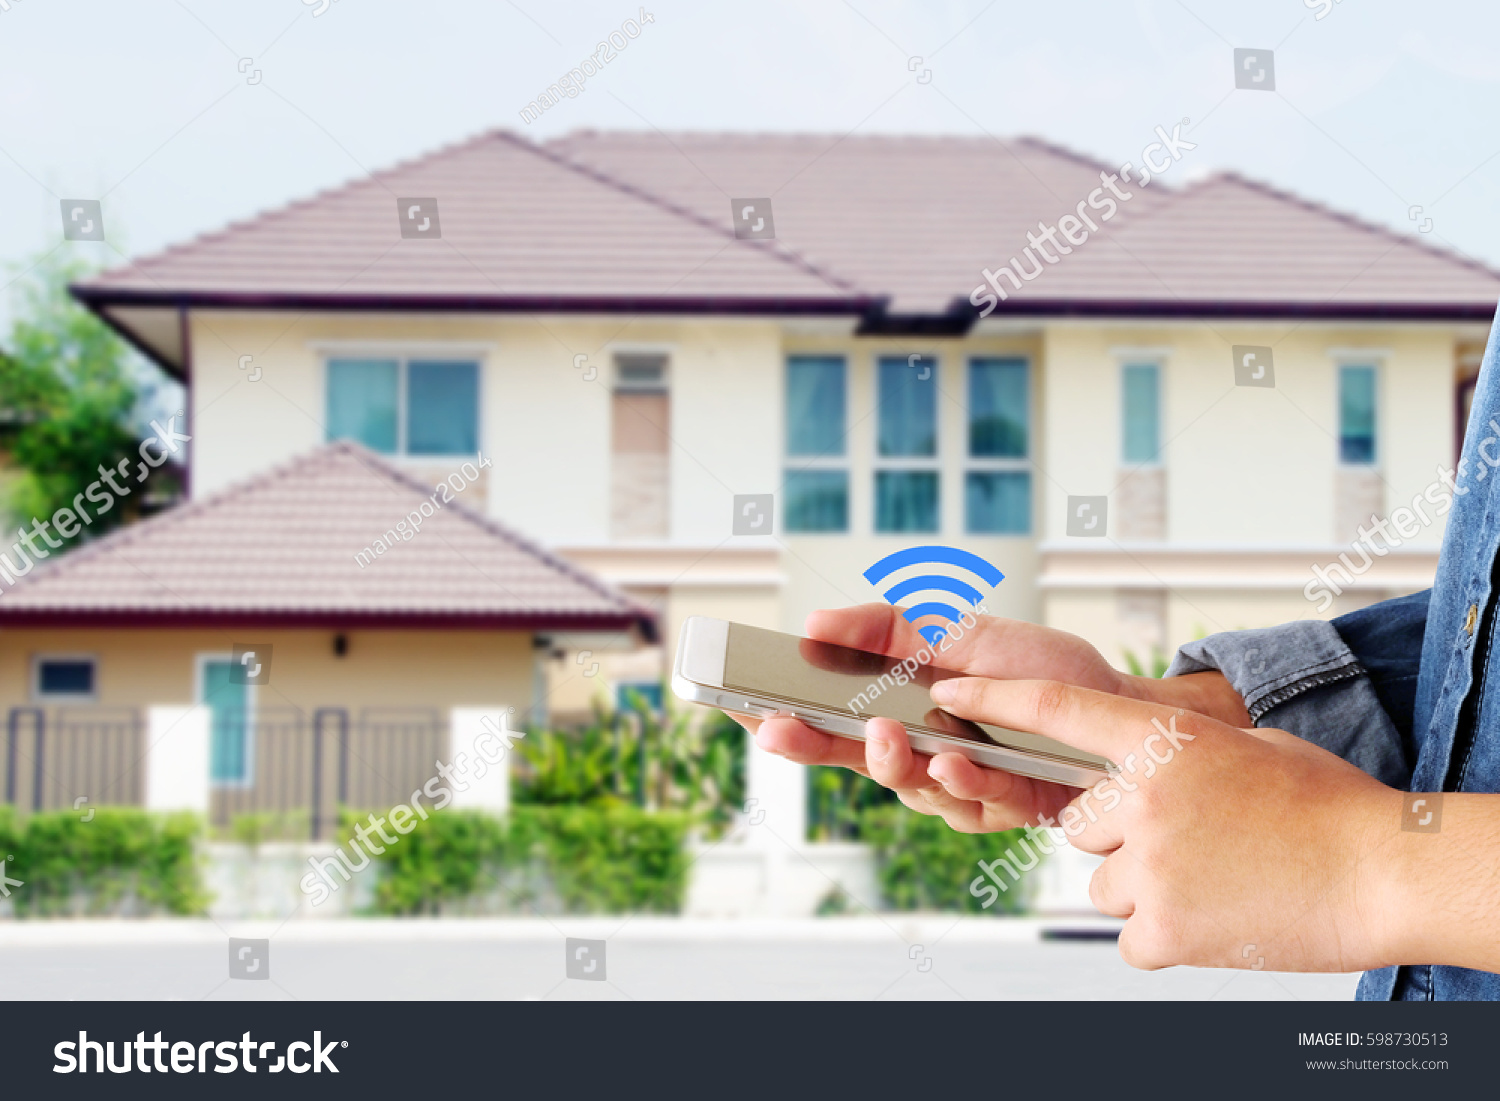 Hand holding smart phone over wifi icon and blur house background, smart home control concept #598730513